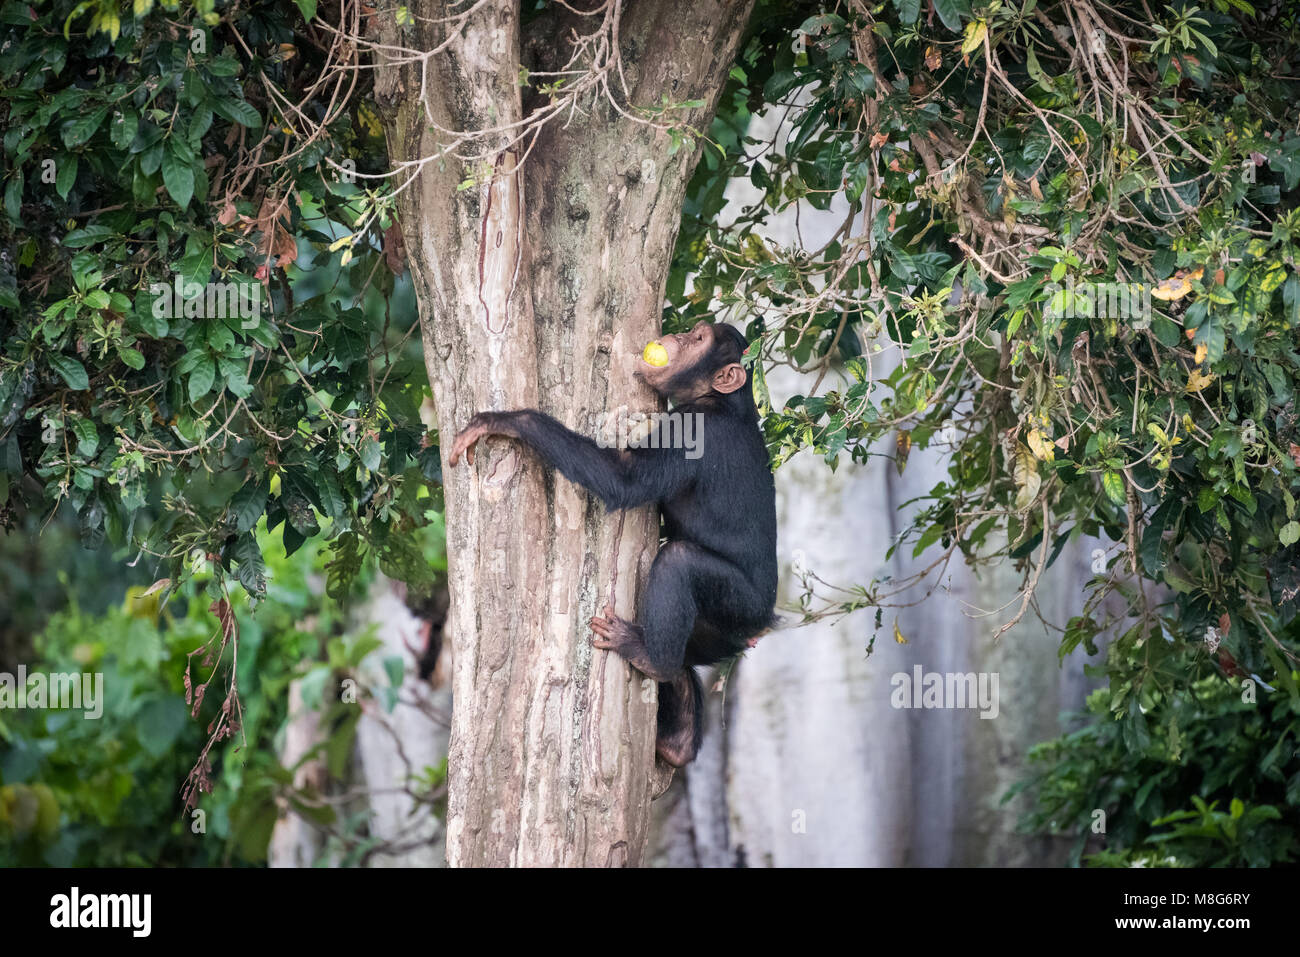 Young chimpanzee climbs on a tree after picking up food in the Ngamba Island Chimpanzee Sanctuary in Uganda Stock Photo